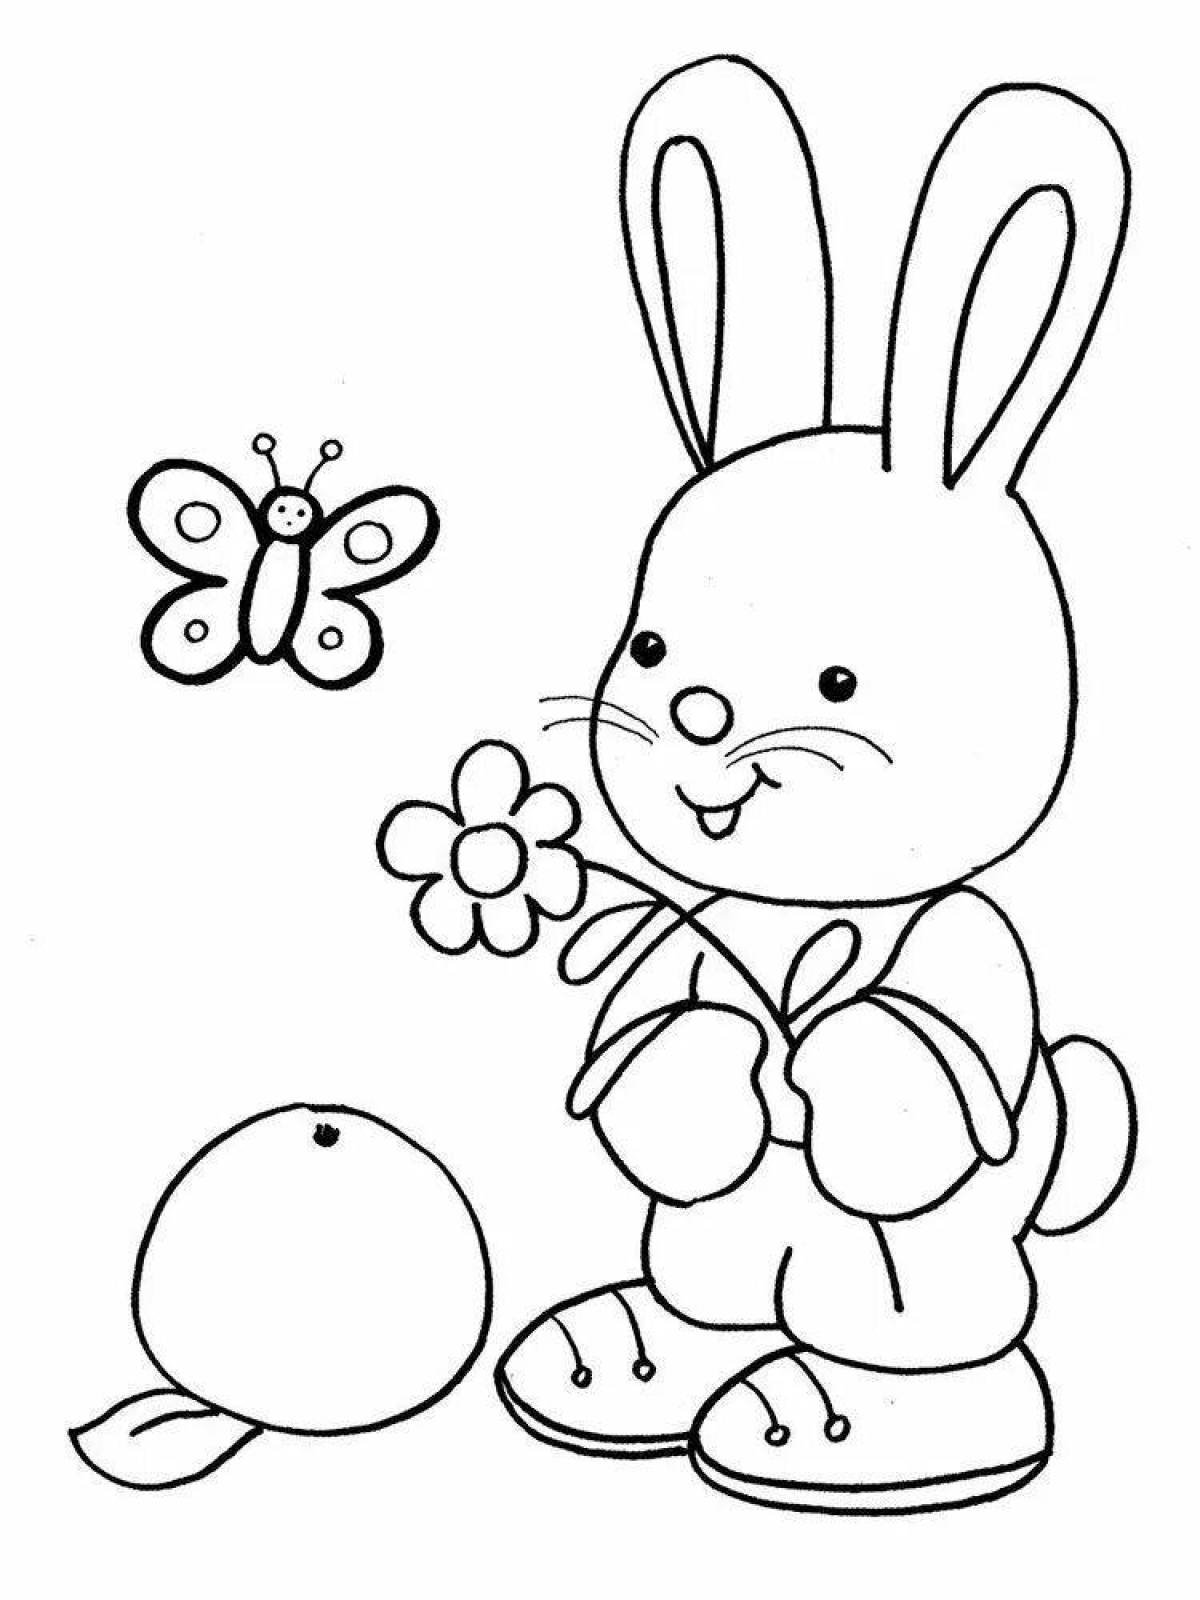 Creative coloring book for kindergarten 4-5 years old